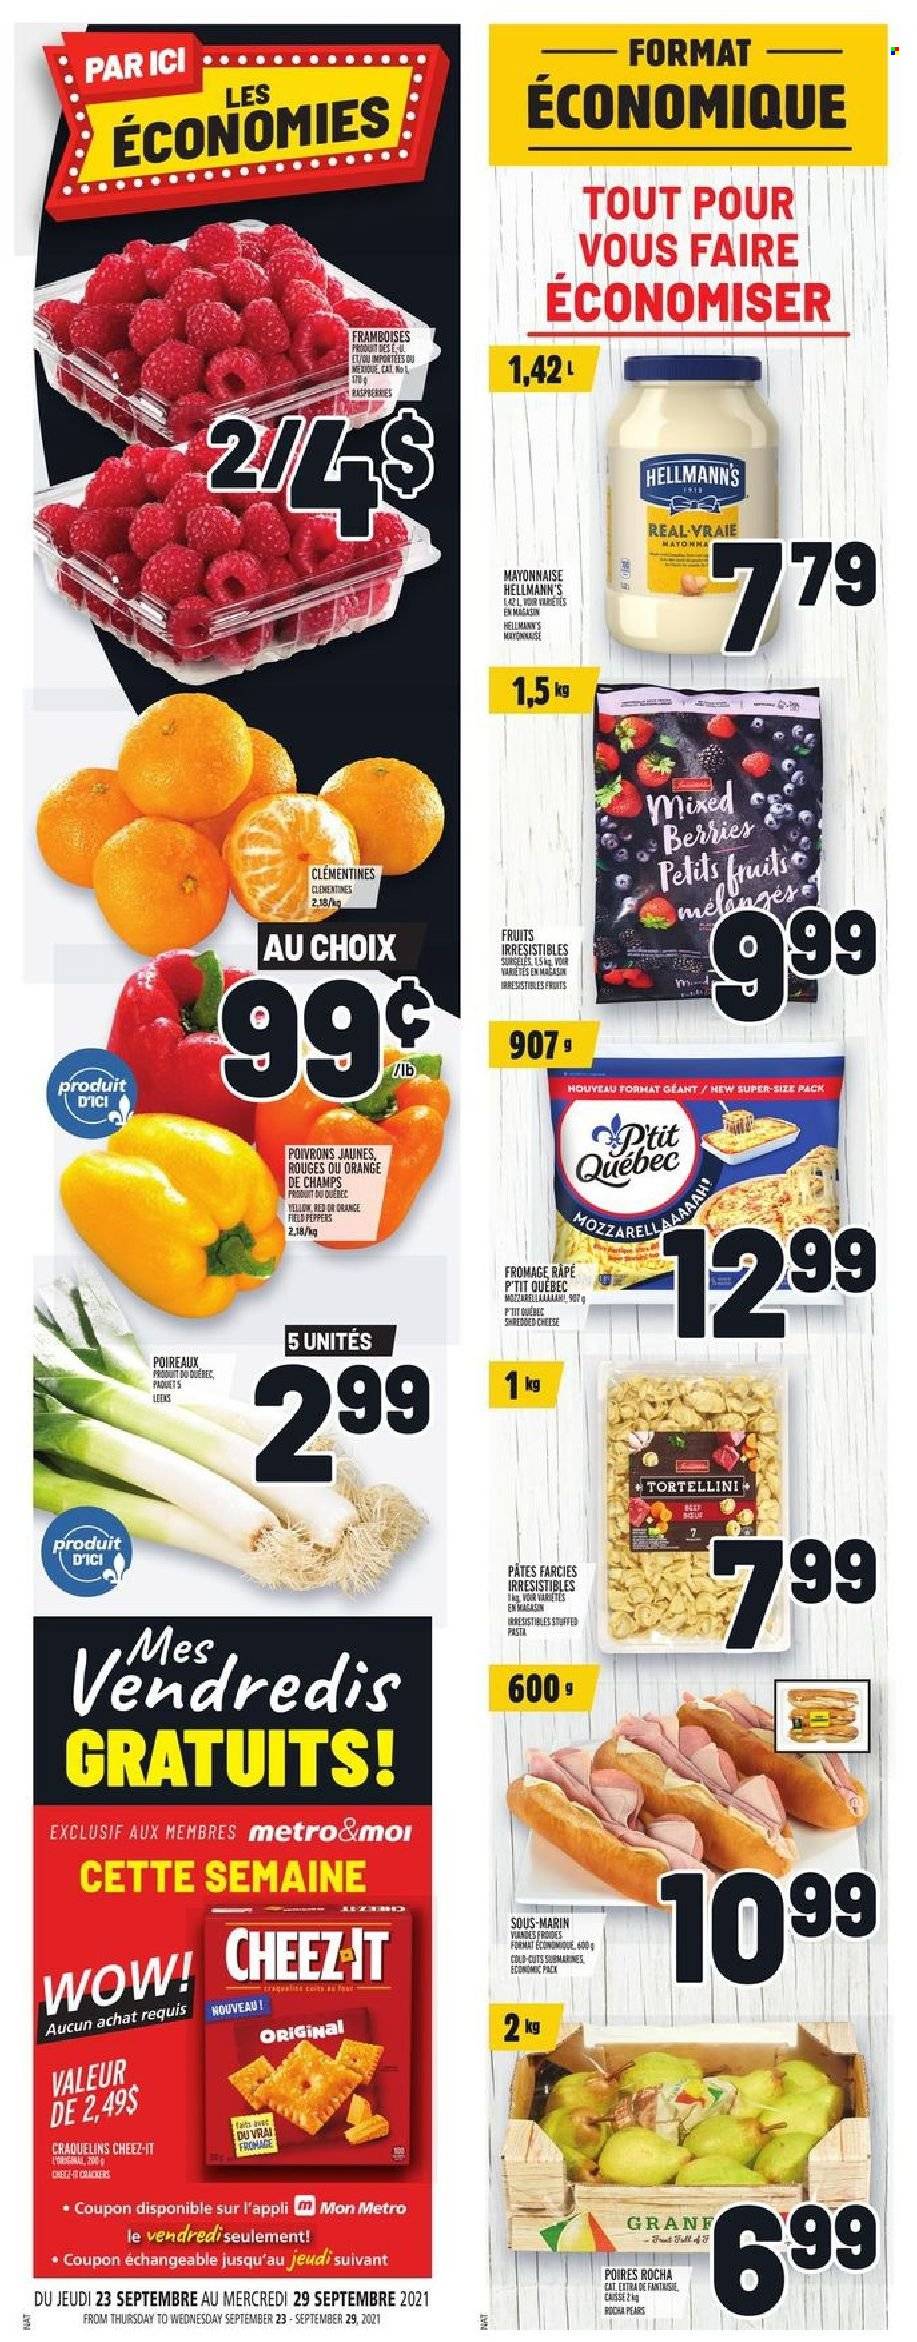 thumbnail - Metro Flyer - September 23, 2021 - September 29, 2021 - Sales products - clementines, pears, pasta, tortellini, cheese, mayonnaise, Hellmann’s, Cheez-It, oranges. Page 14.